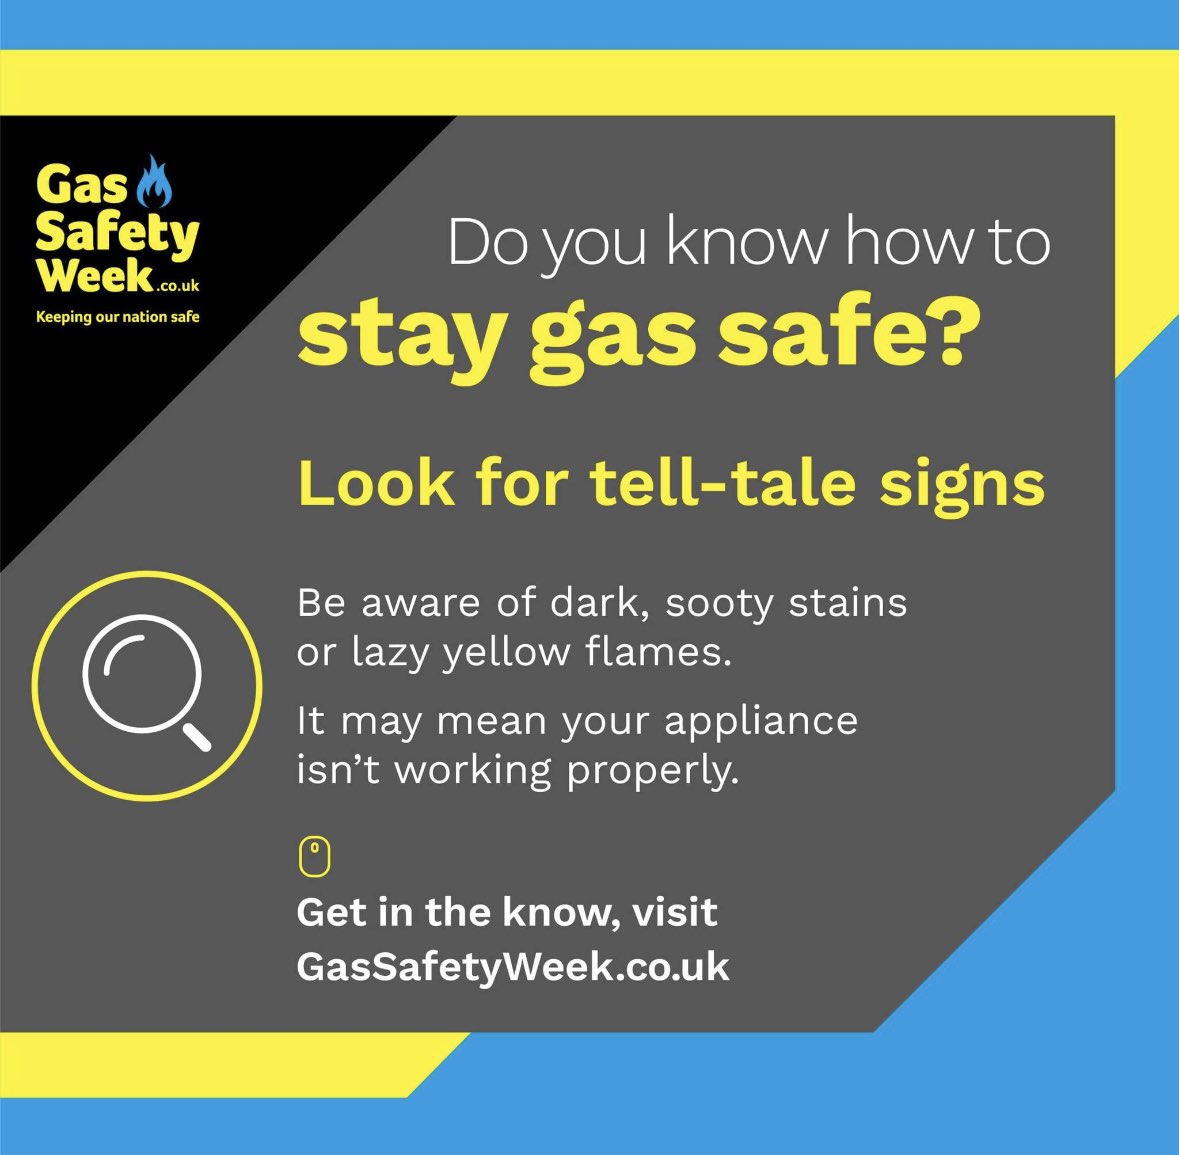 It’s essential to stay aware of vital gas safety advice as we go into the winter months. Look for signs of unsafe gas appliances, such as a lazy yellow flame, boiler errors, and uncommon noises. Find out more at GasSafeRegister.co.uk
#GSW23 #GasSafetyWeek